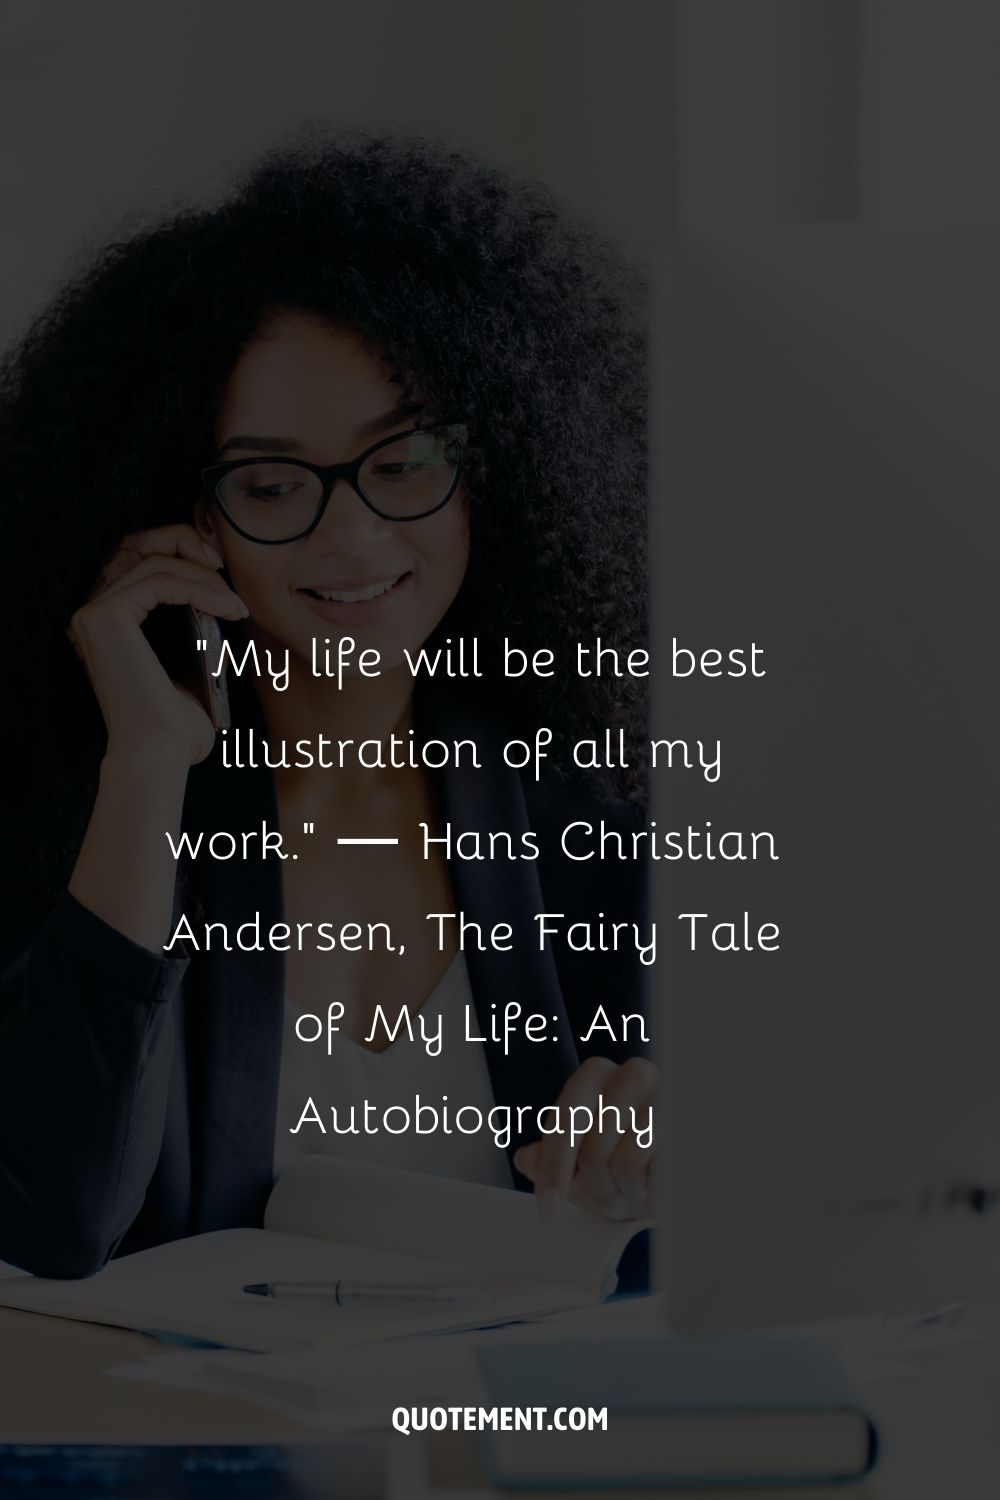 “My life will be the best illustration of all my work.” ― Hans Christian Andersen, The Fairy Tale of My Life An Autobiography